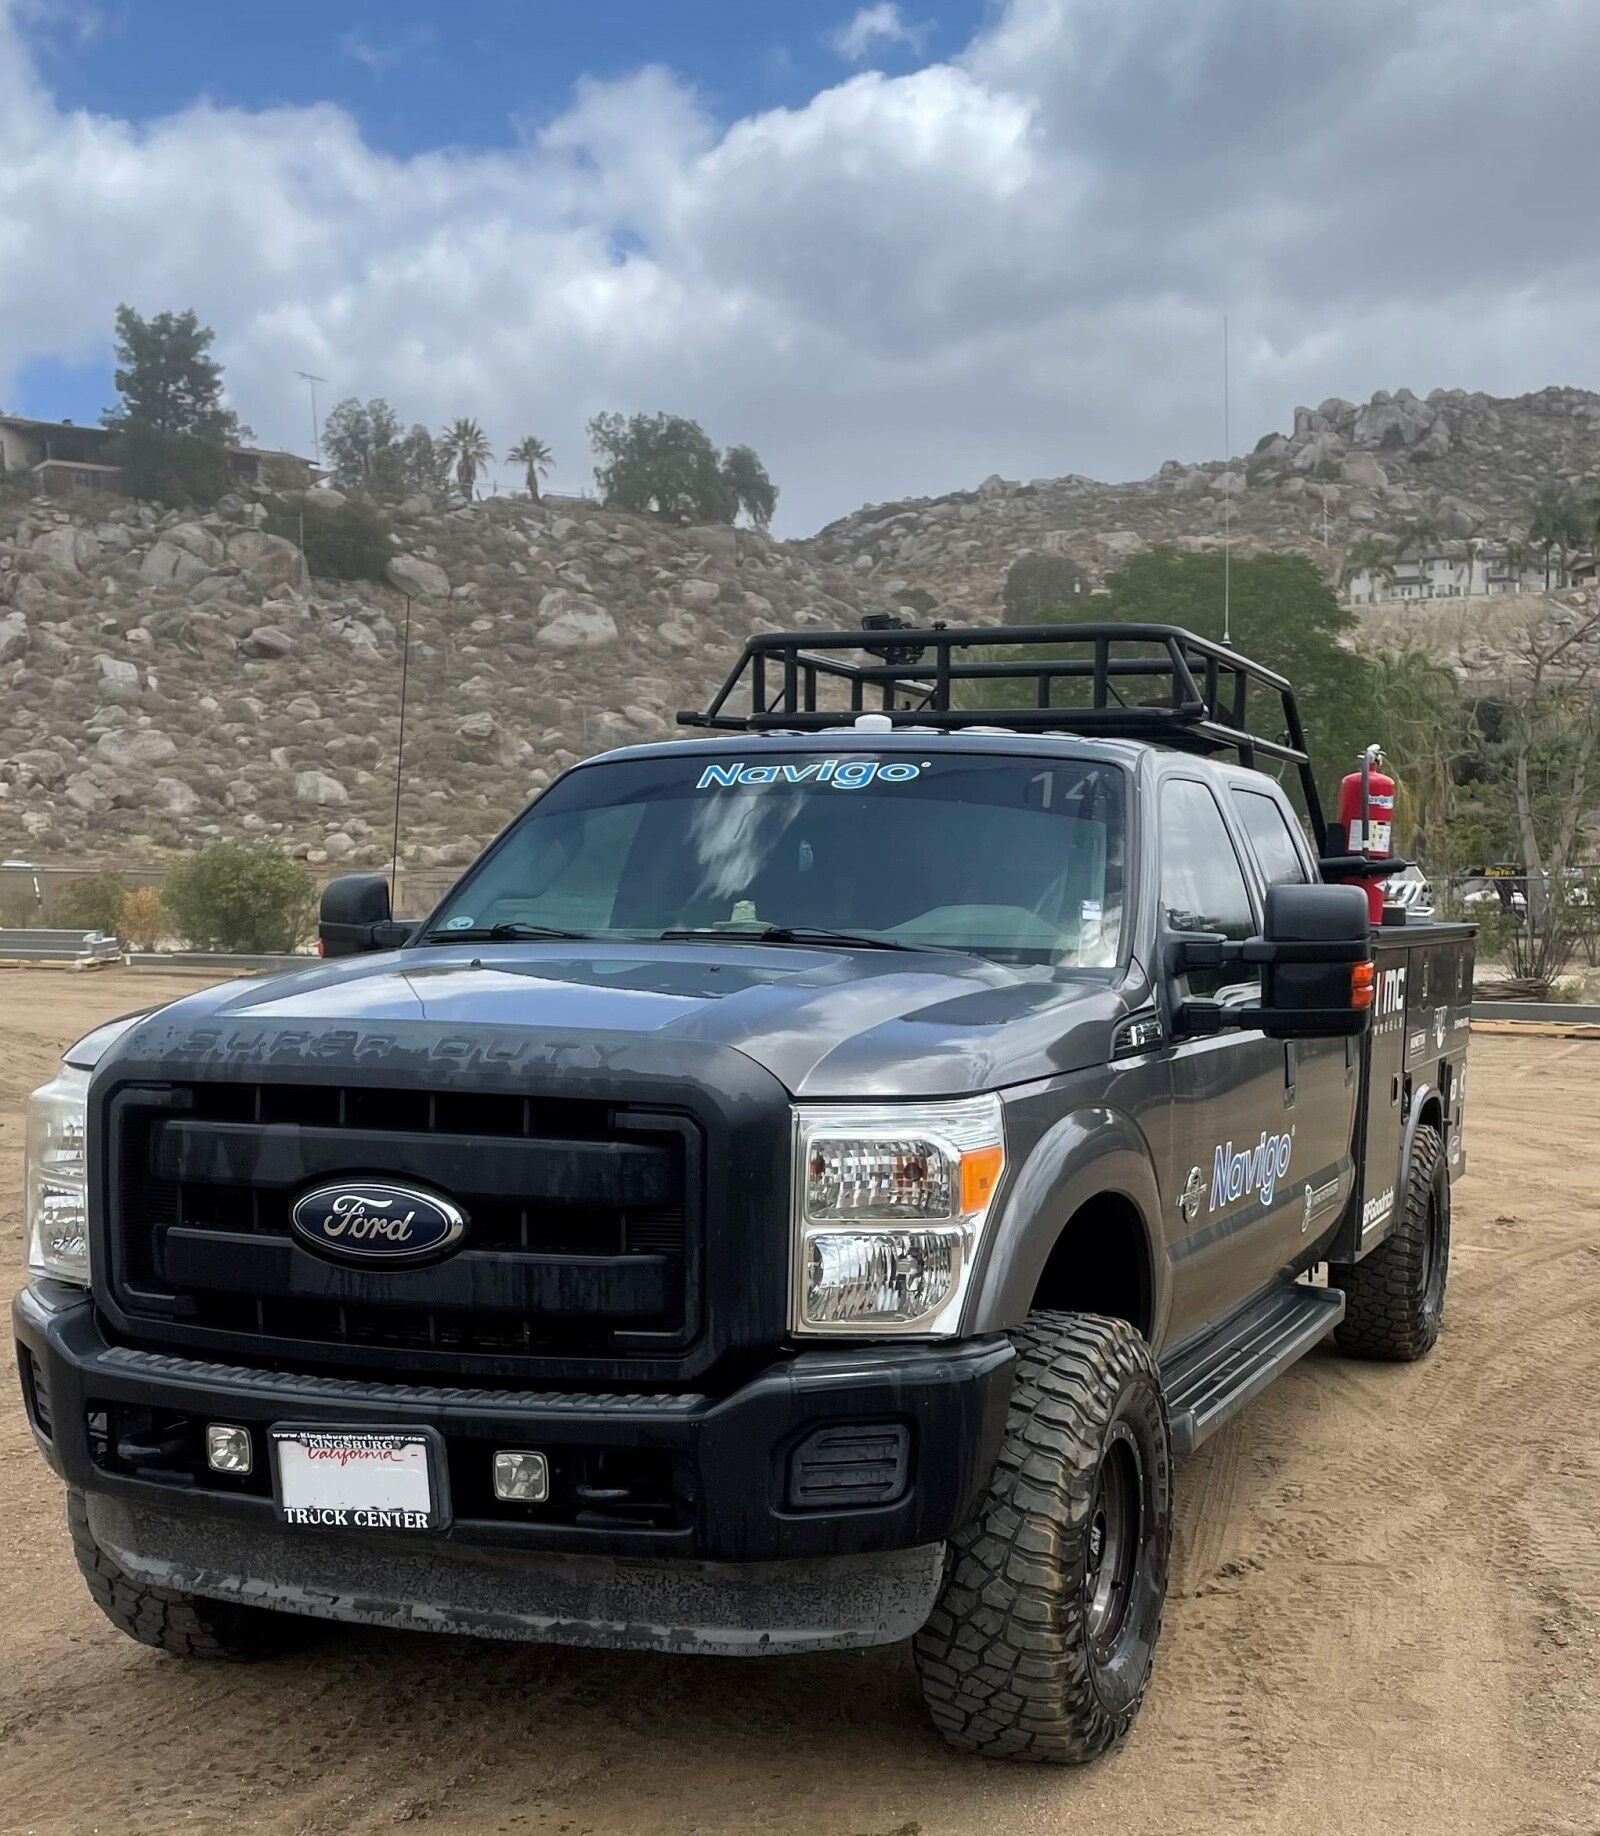 For Sale: 2012 Ford F250 Diesel 4WD Chase Truck - photo1